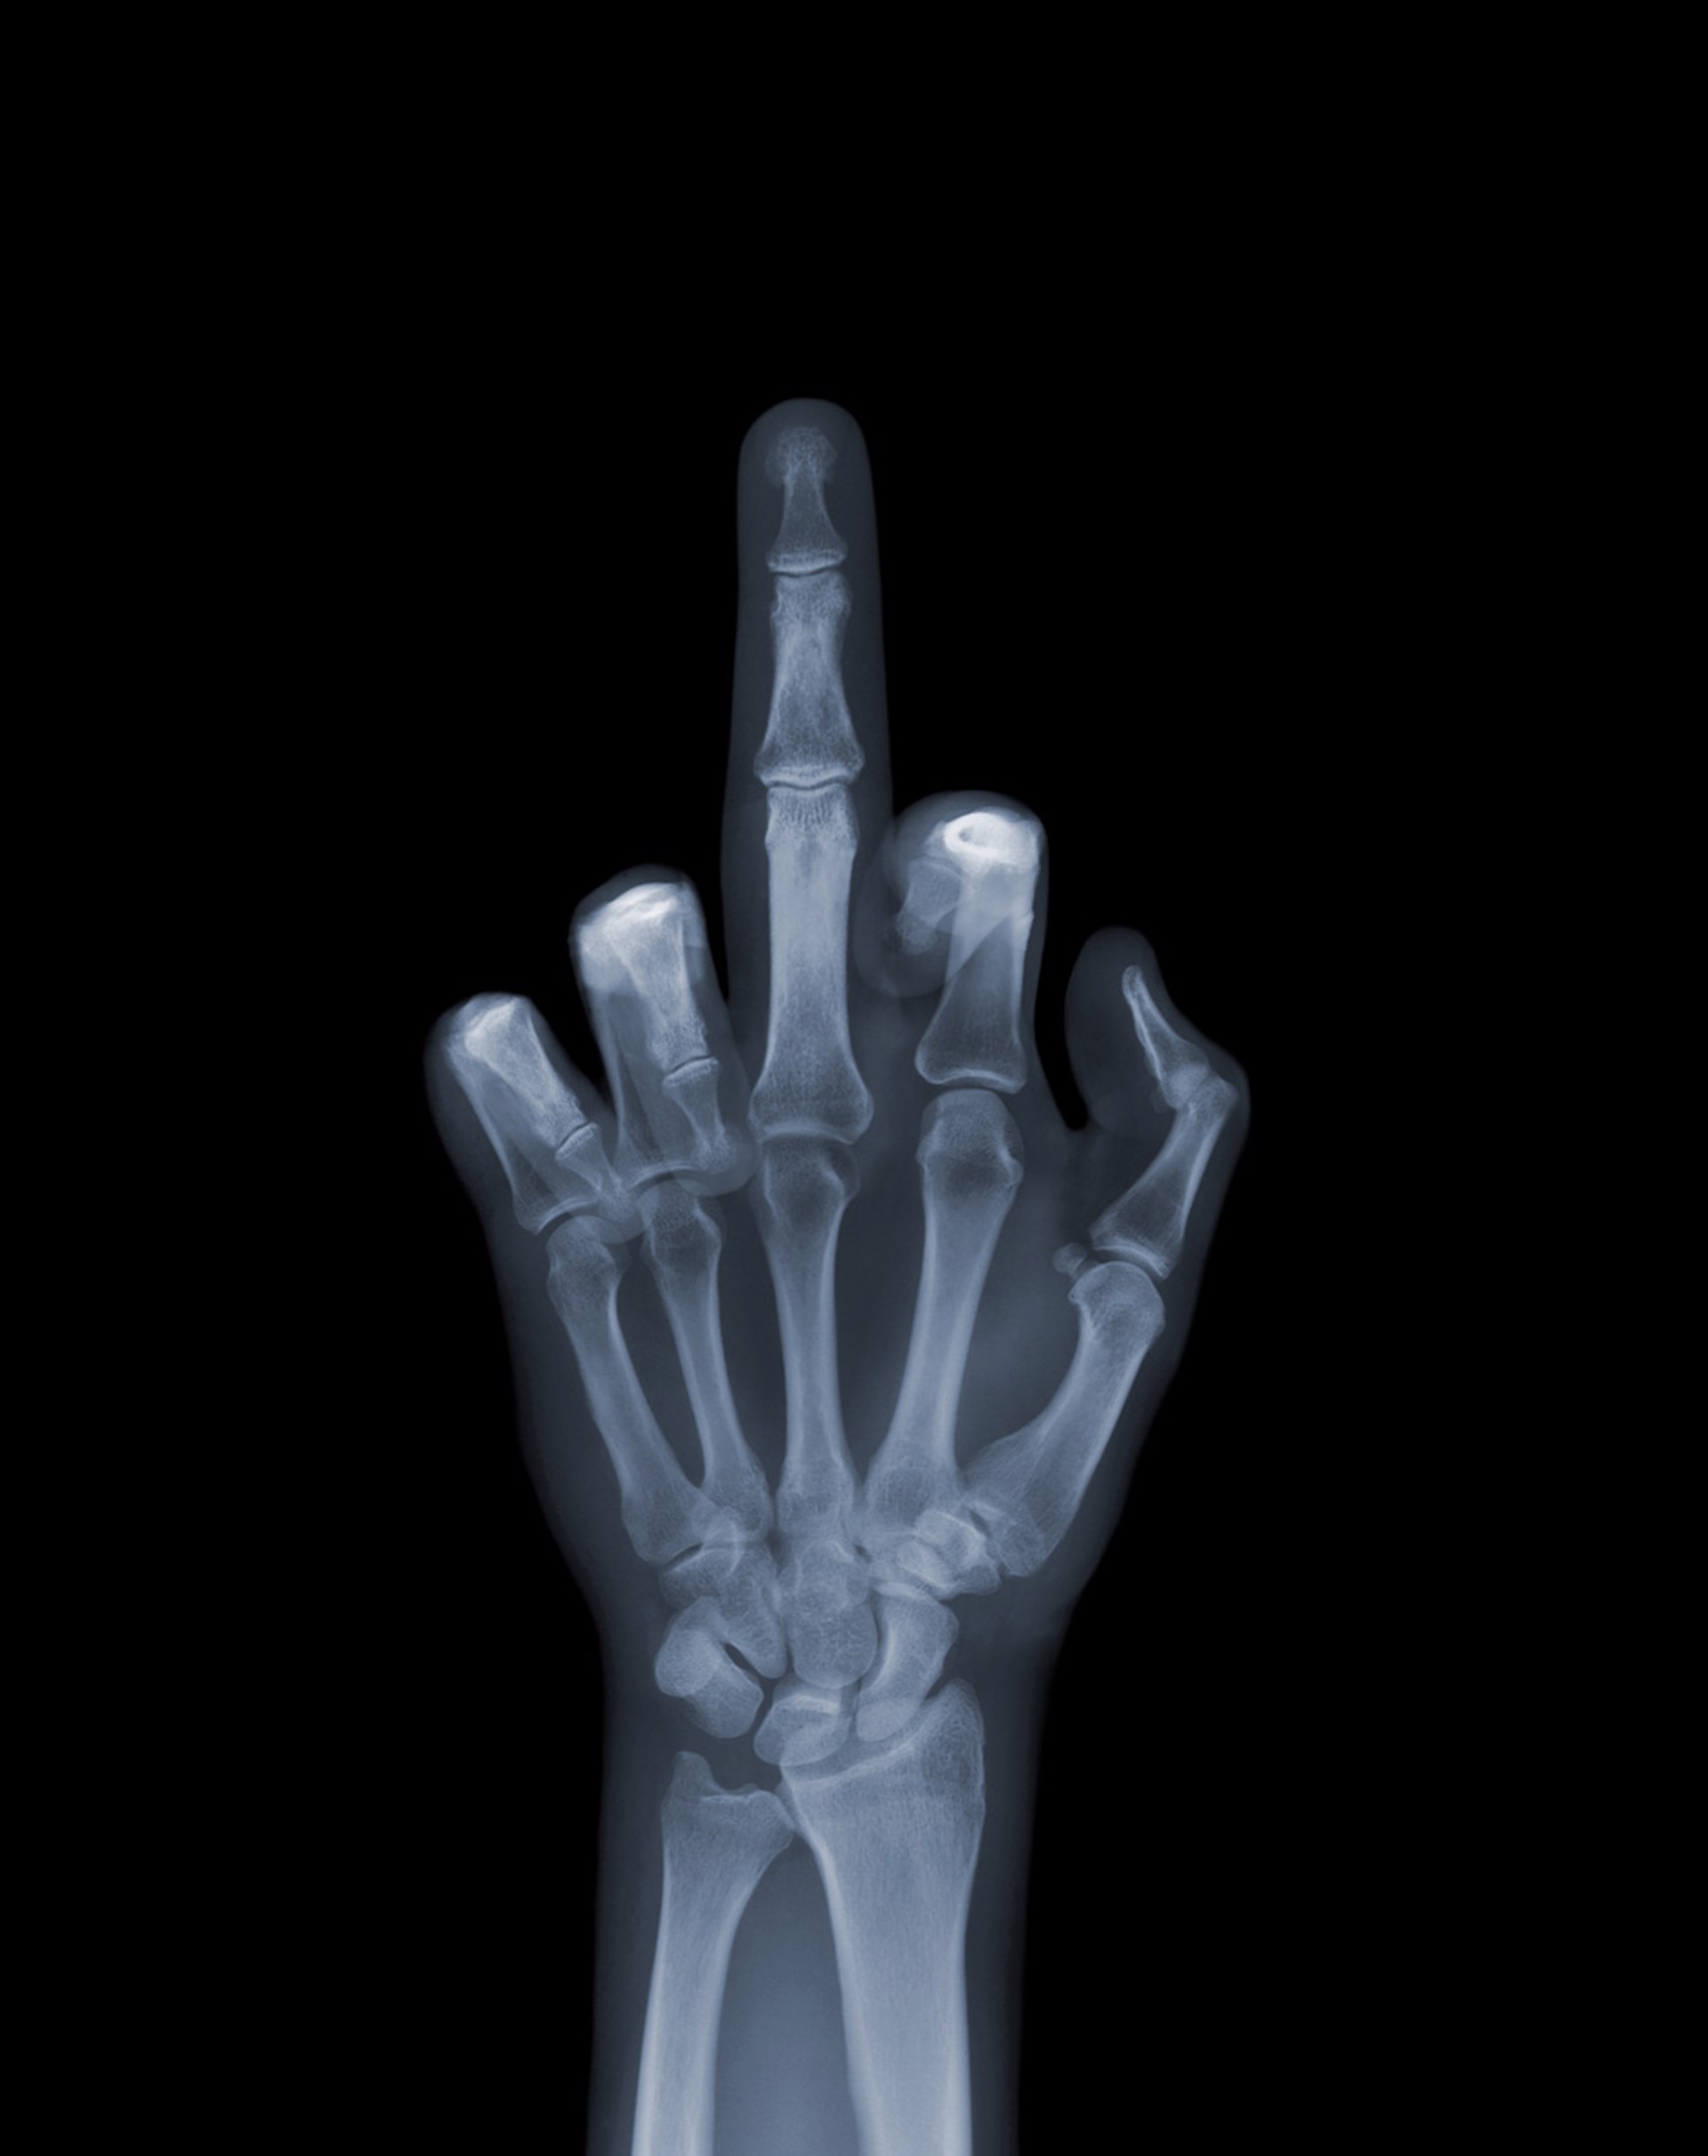 The Finger by Nick Veasey